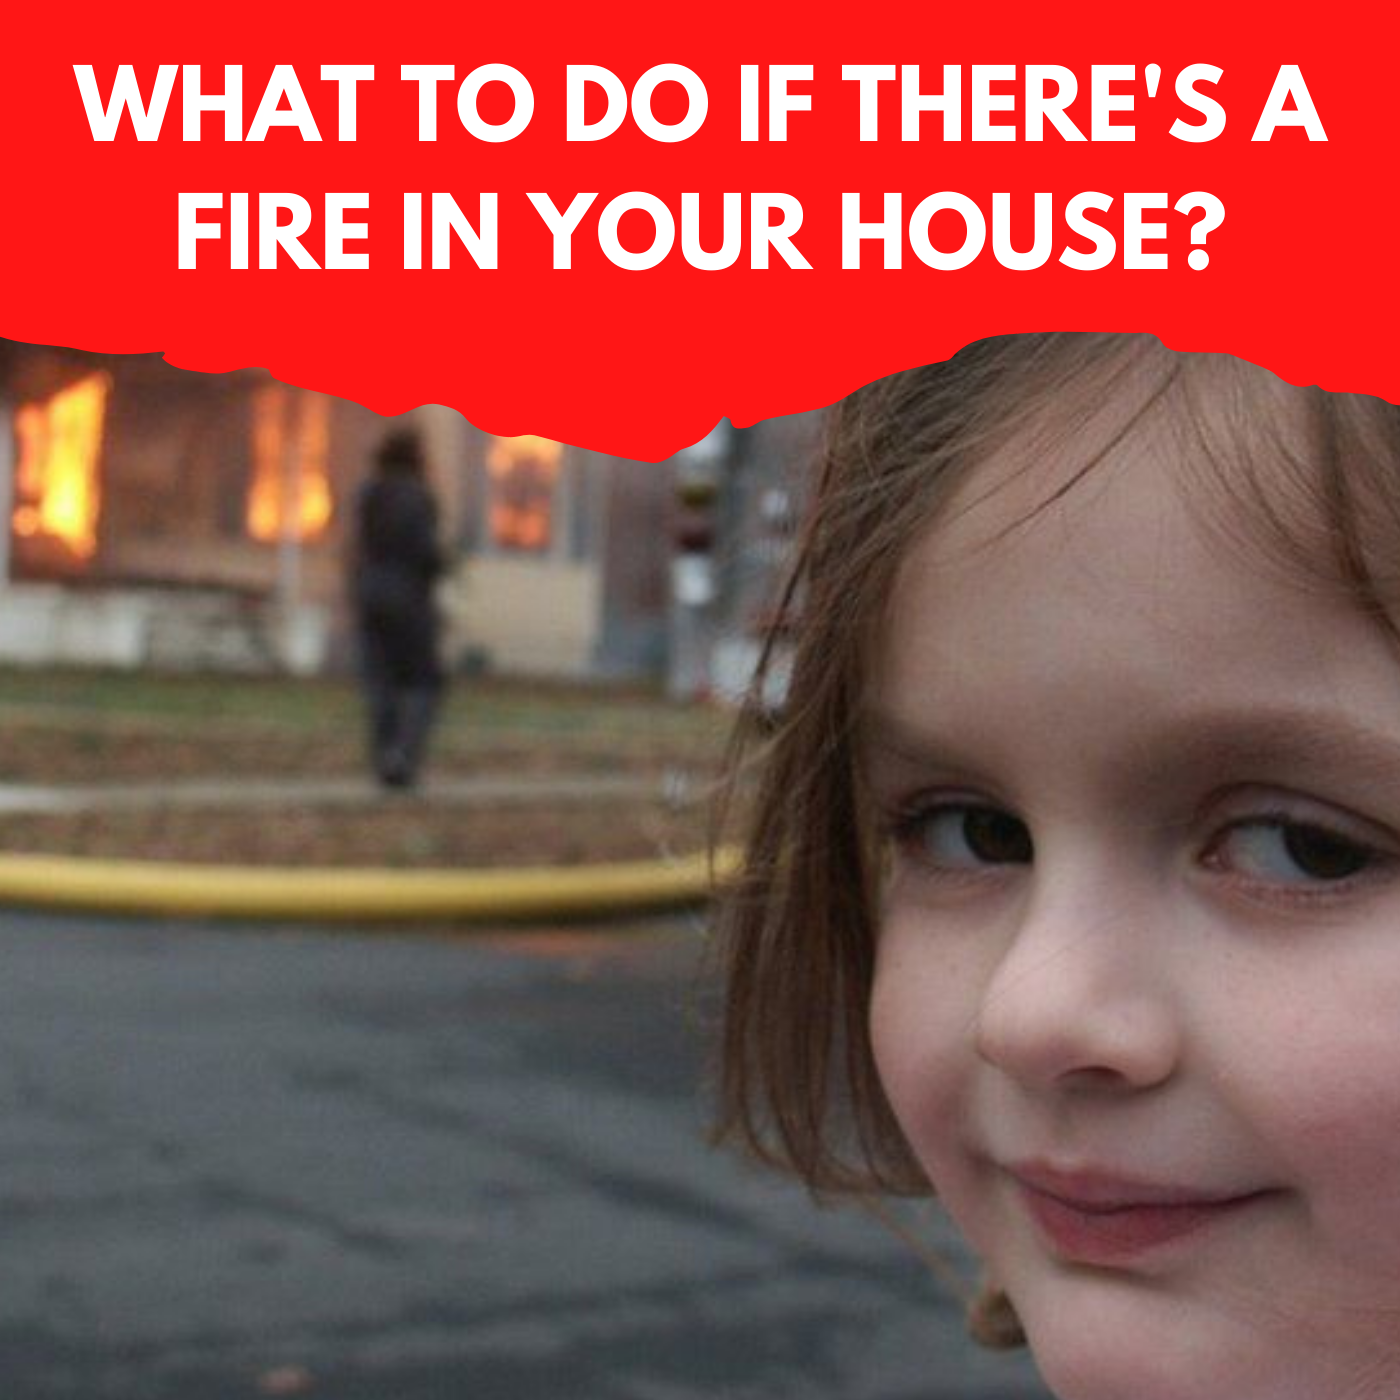 What to do if there's a fire in your house?